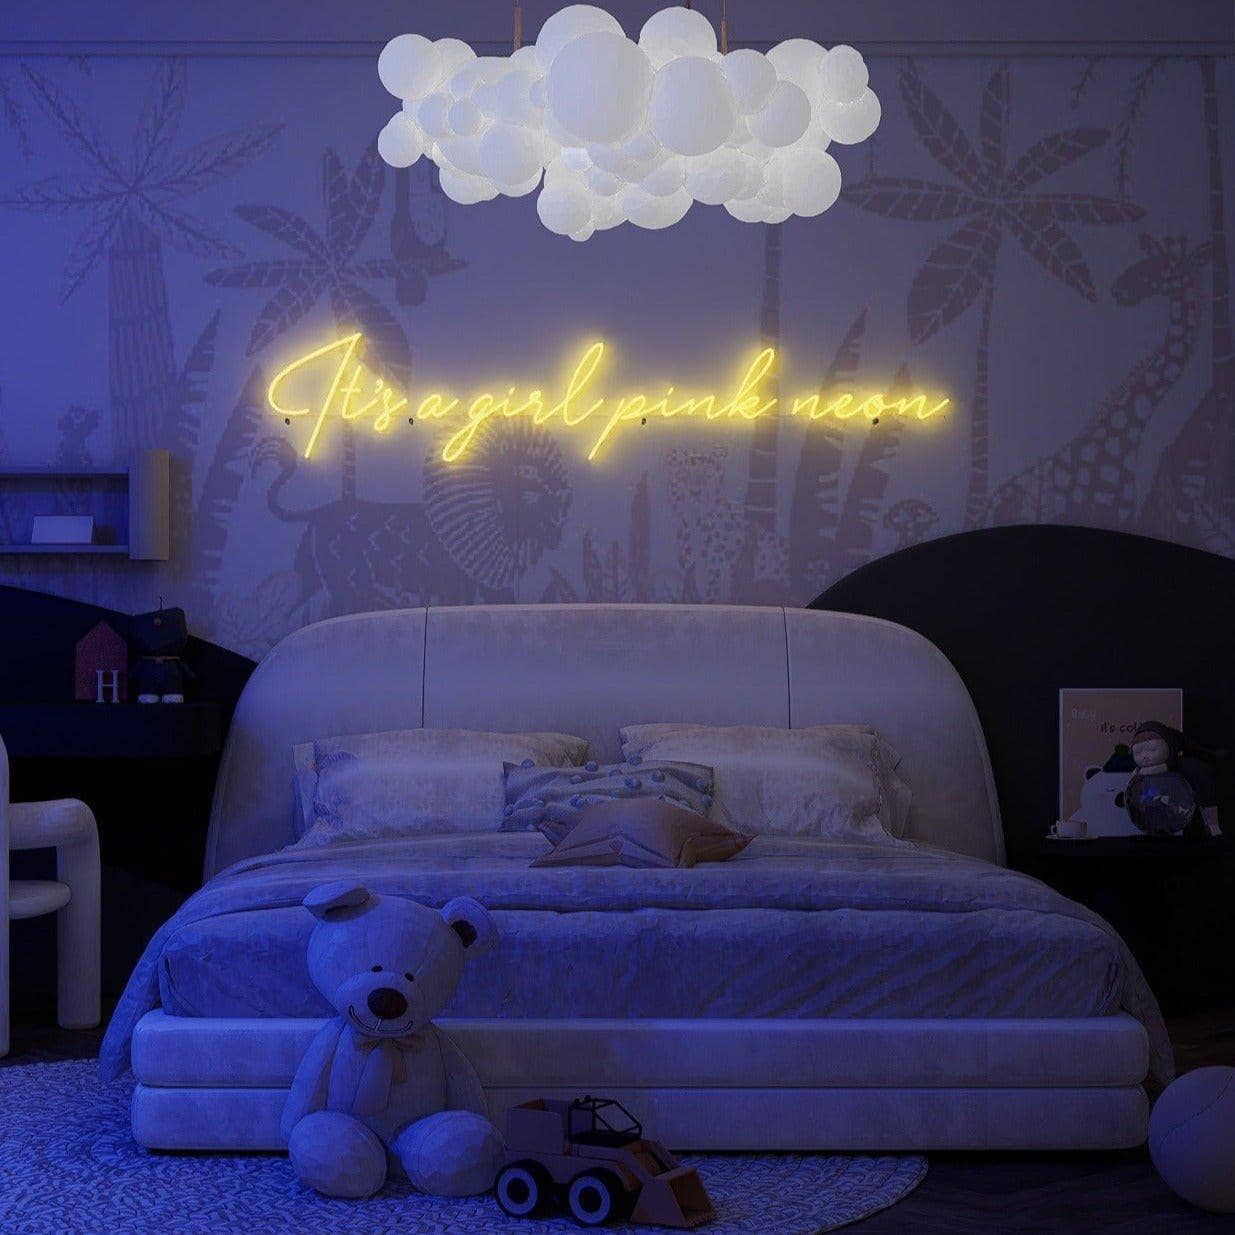 yellow-neon-lights-lit-up-at-night-and-hung-on-the-wall-for-display-it's-a-girl-pink-neon